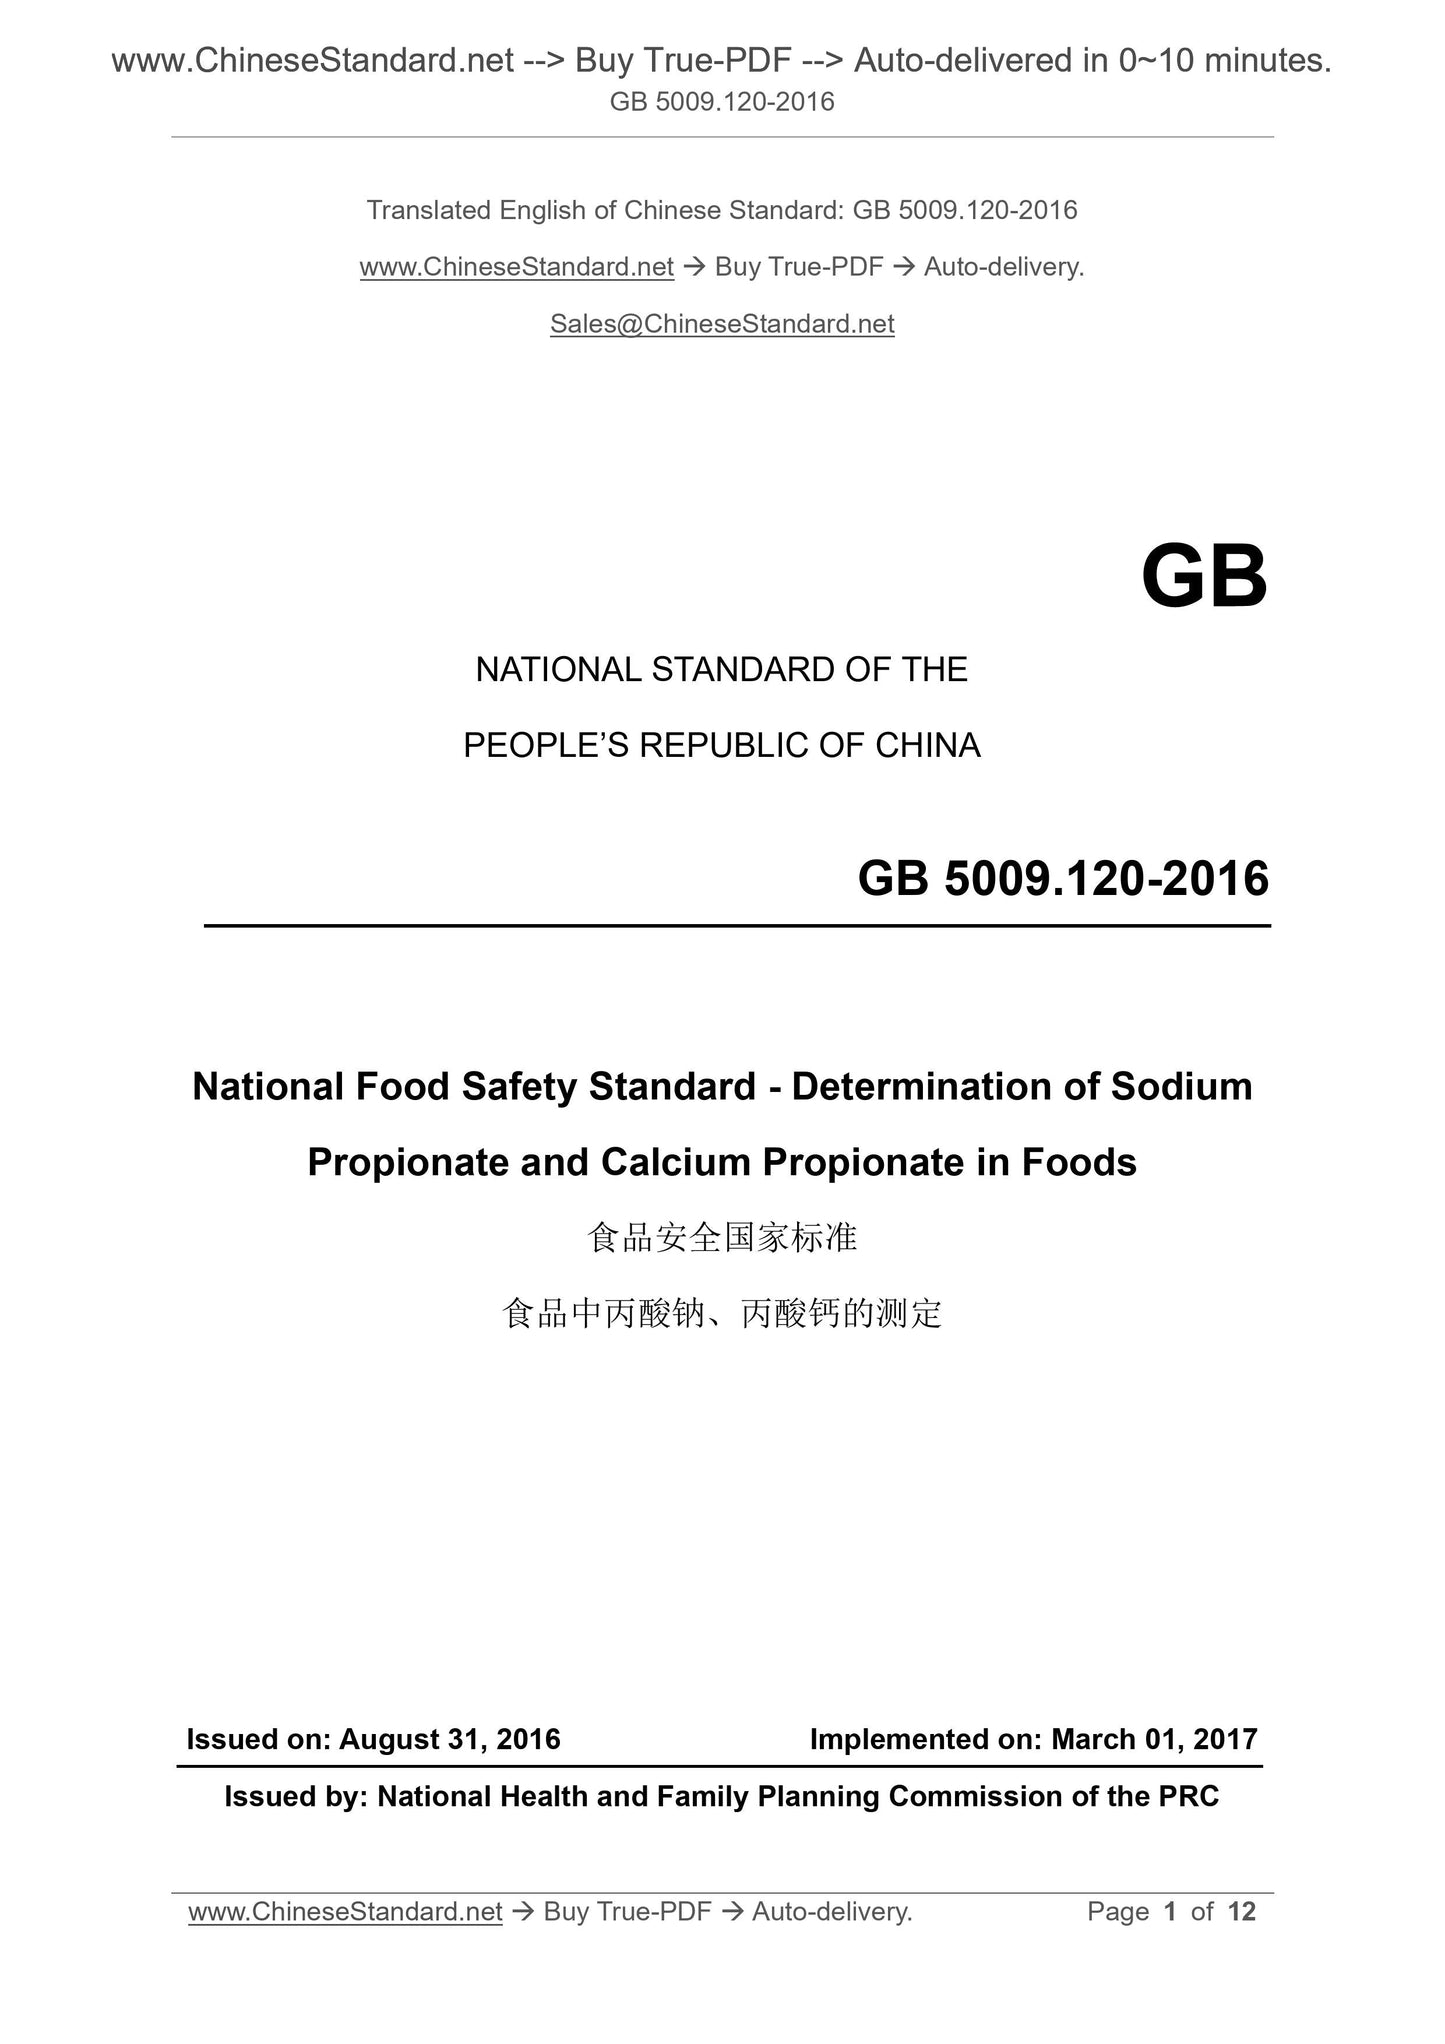 GB 5009.120-2016 Page 1